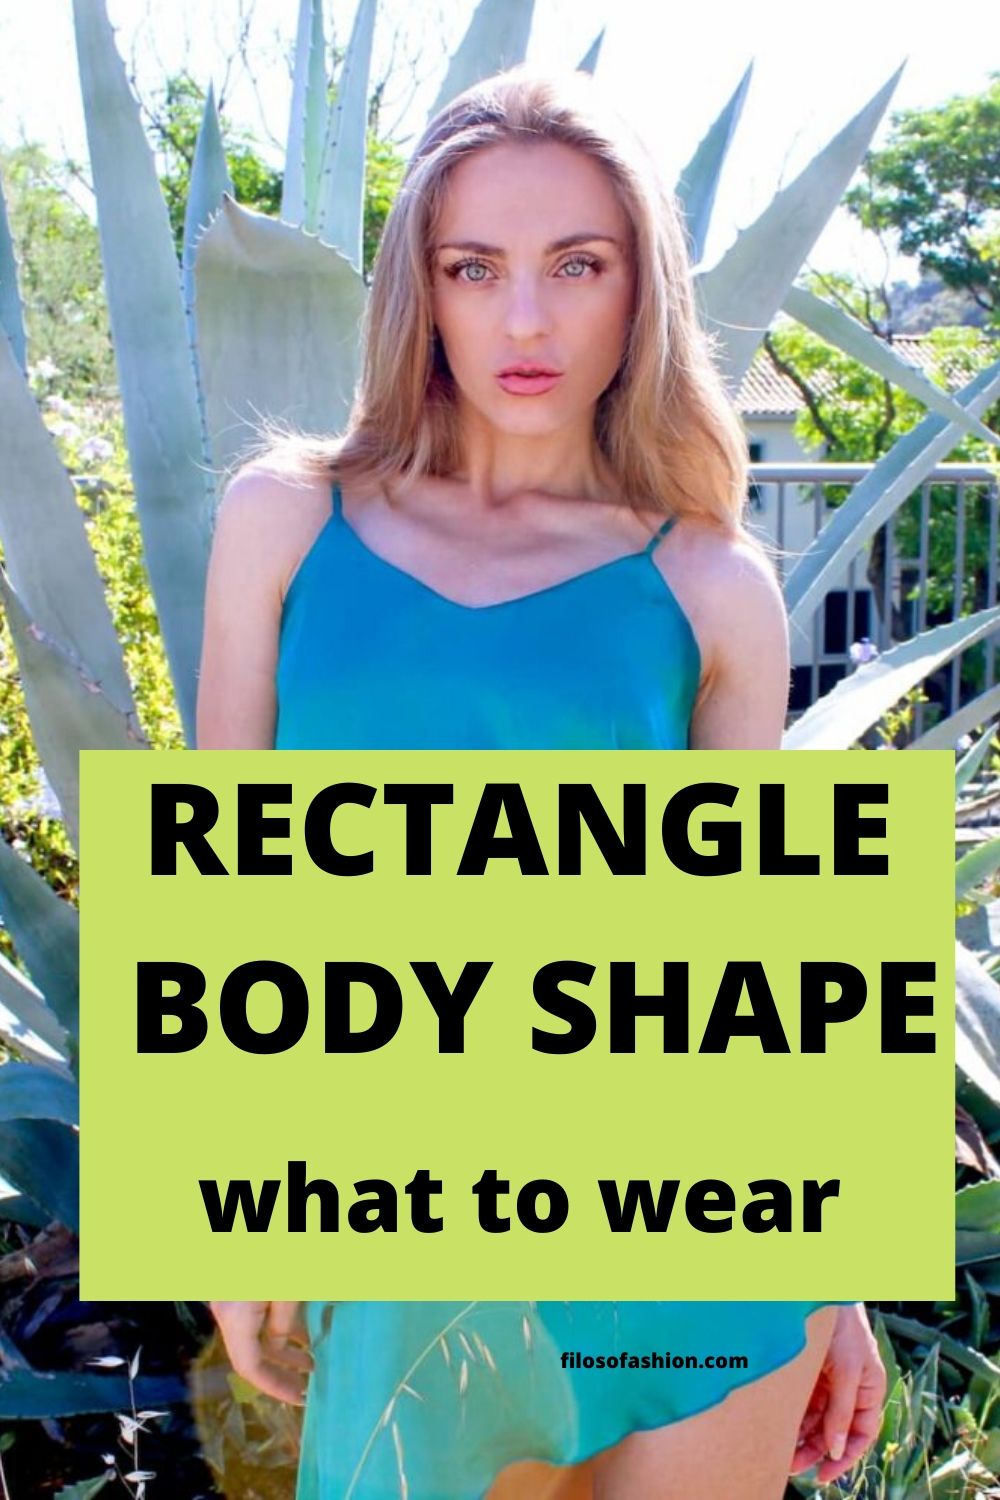 How To Dress For A Rectangle Body Shape Stylist S Tips